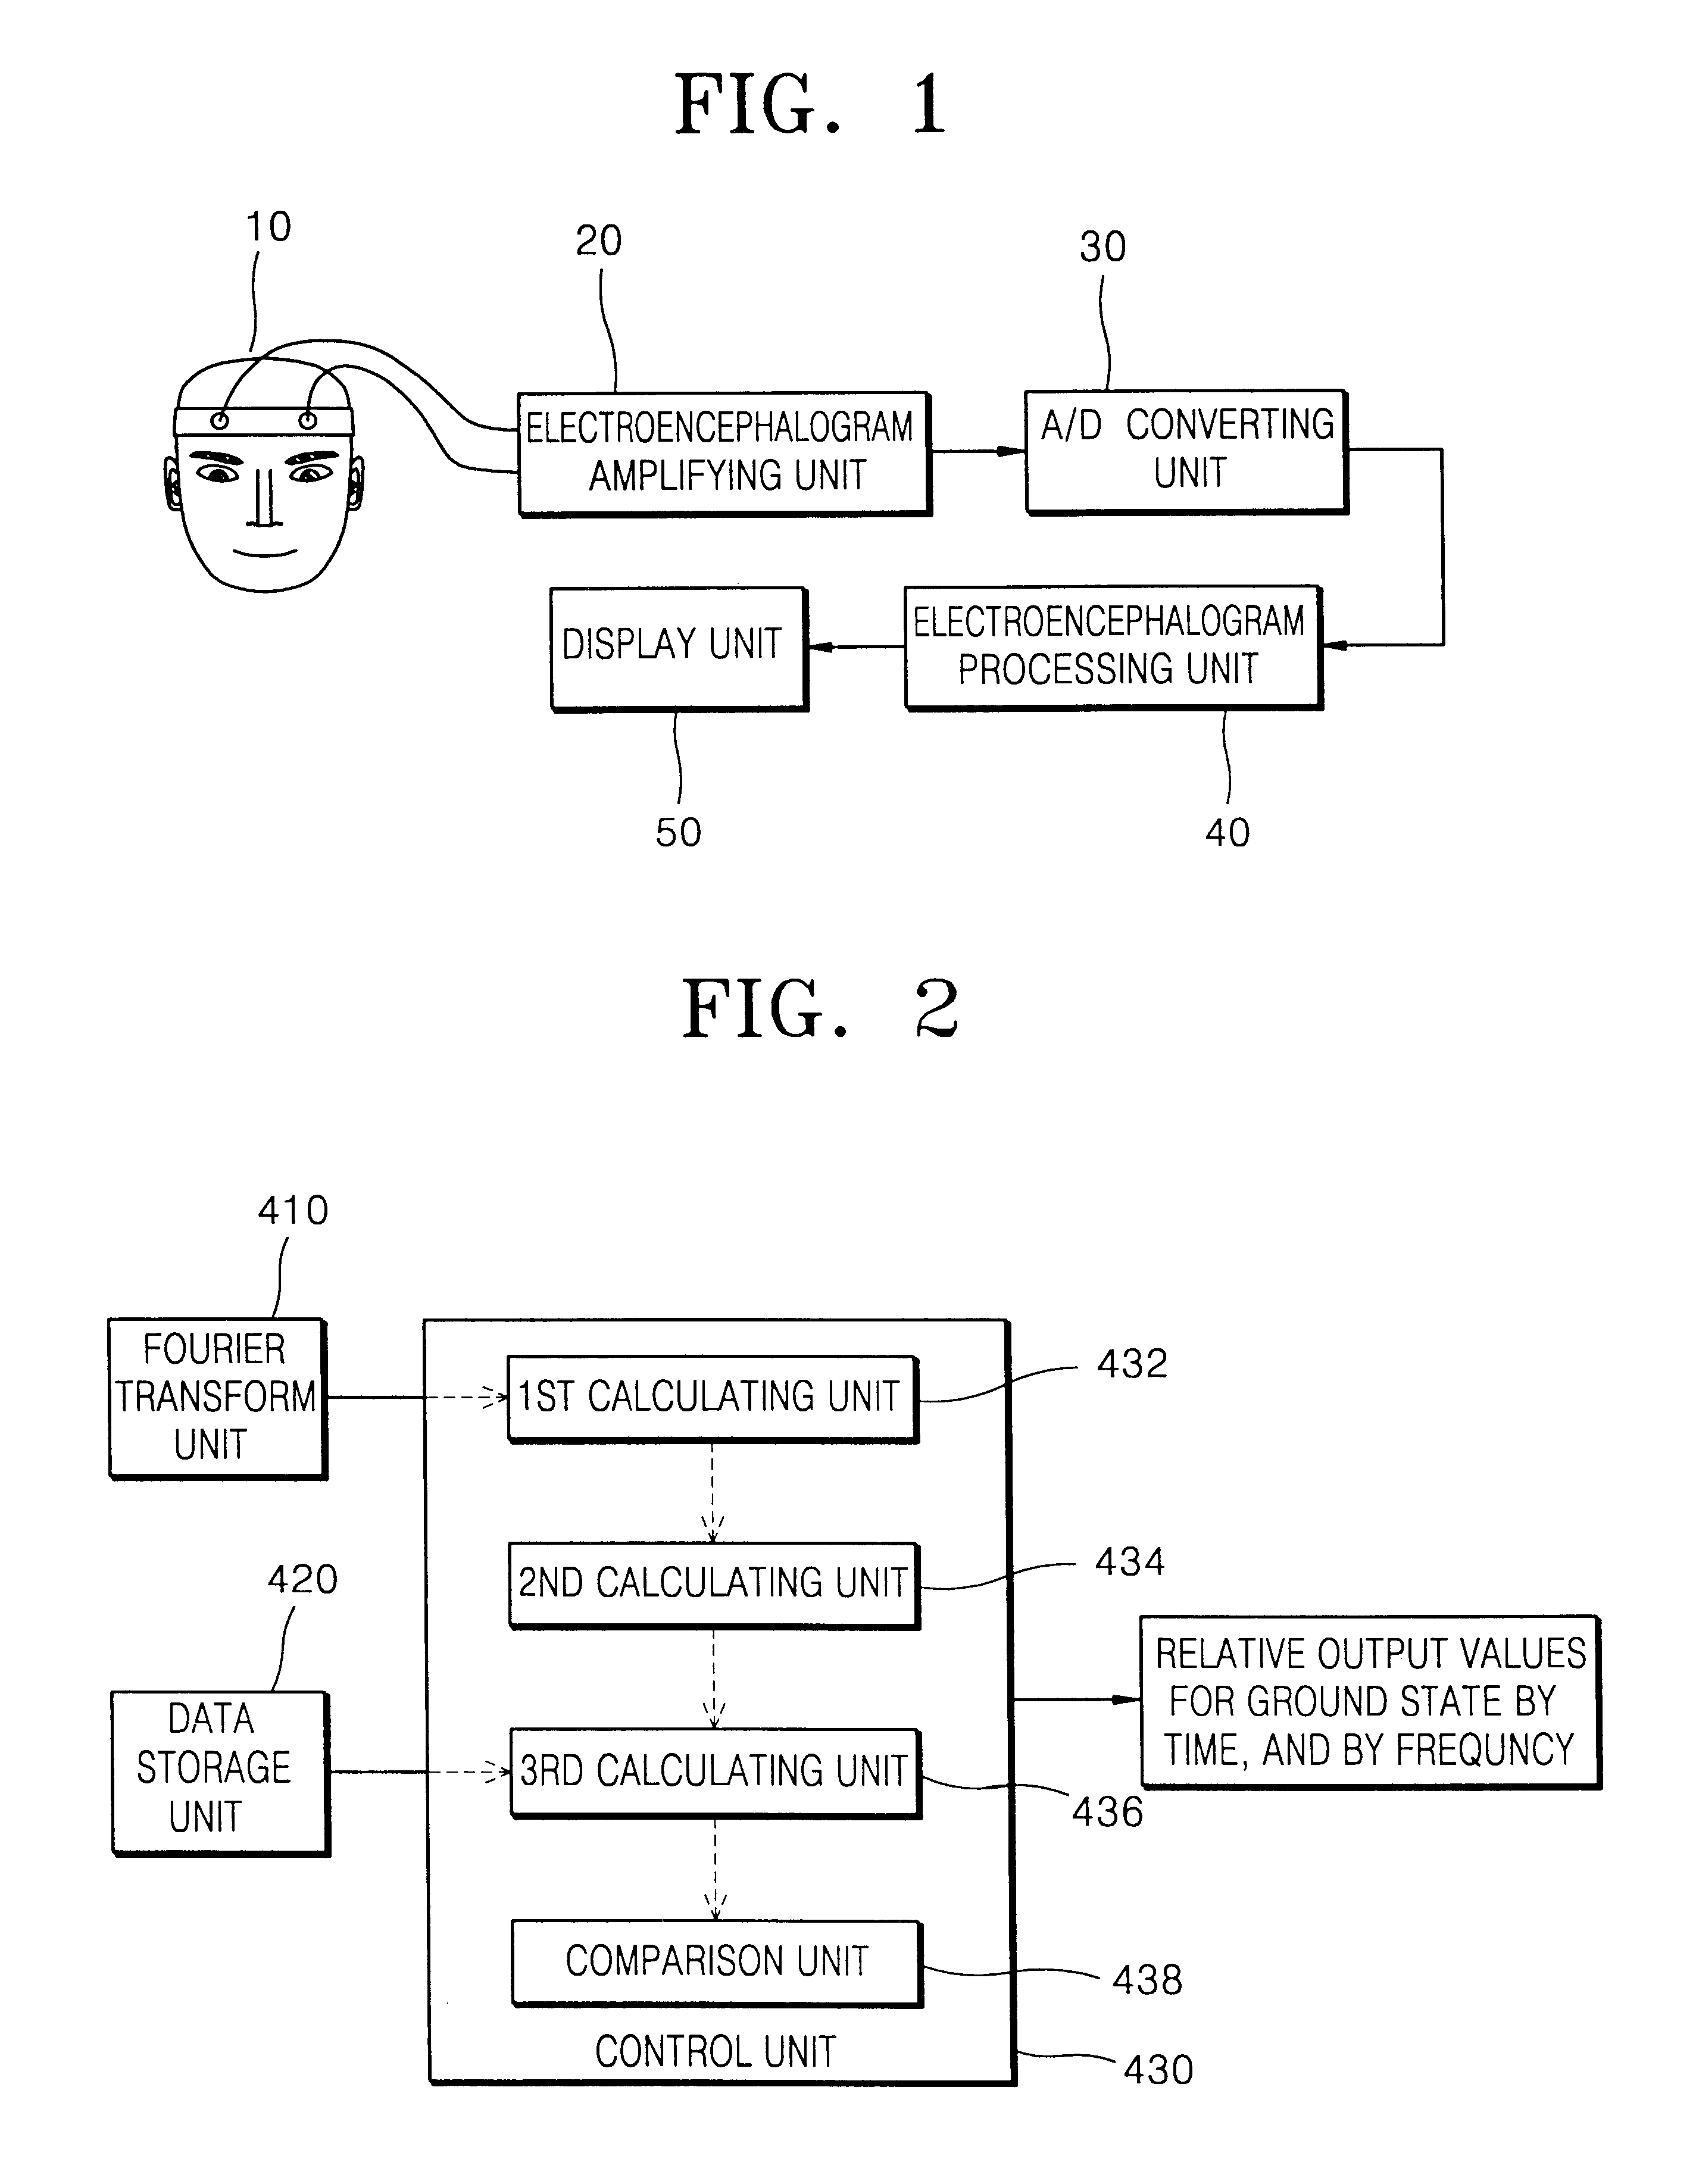 Apparatus and method for measuring electroencephalogram